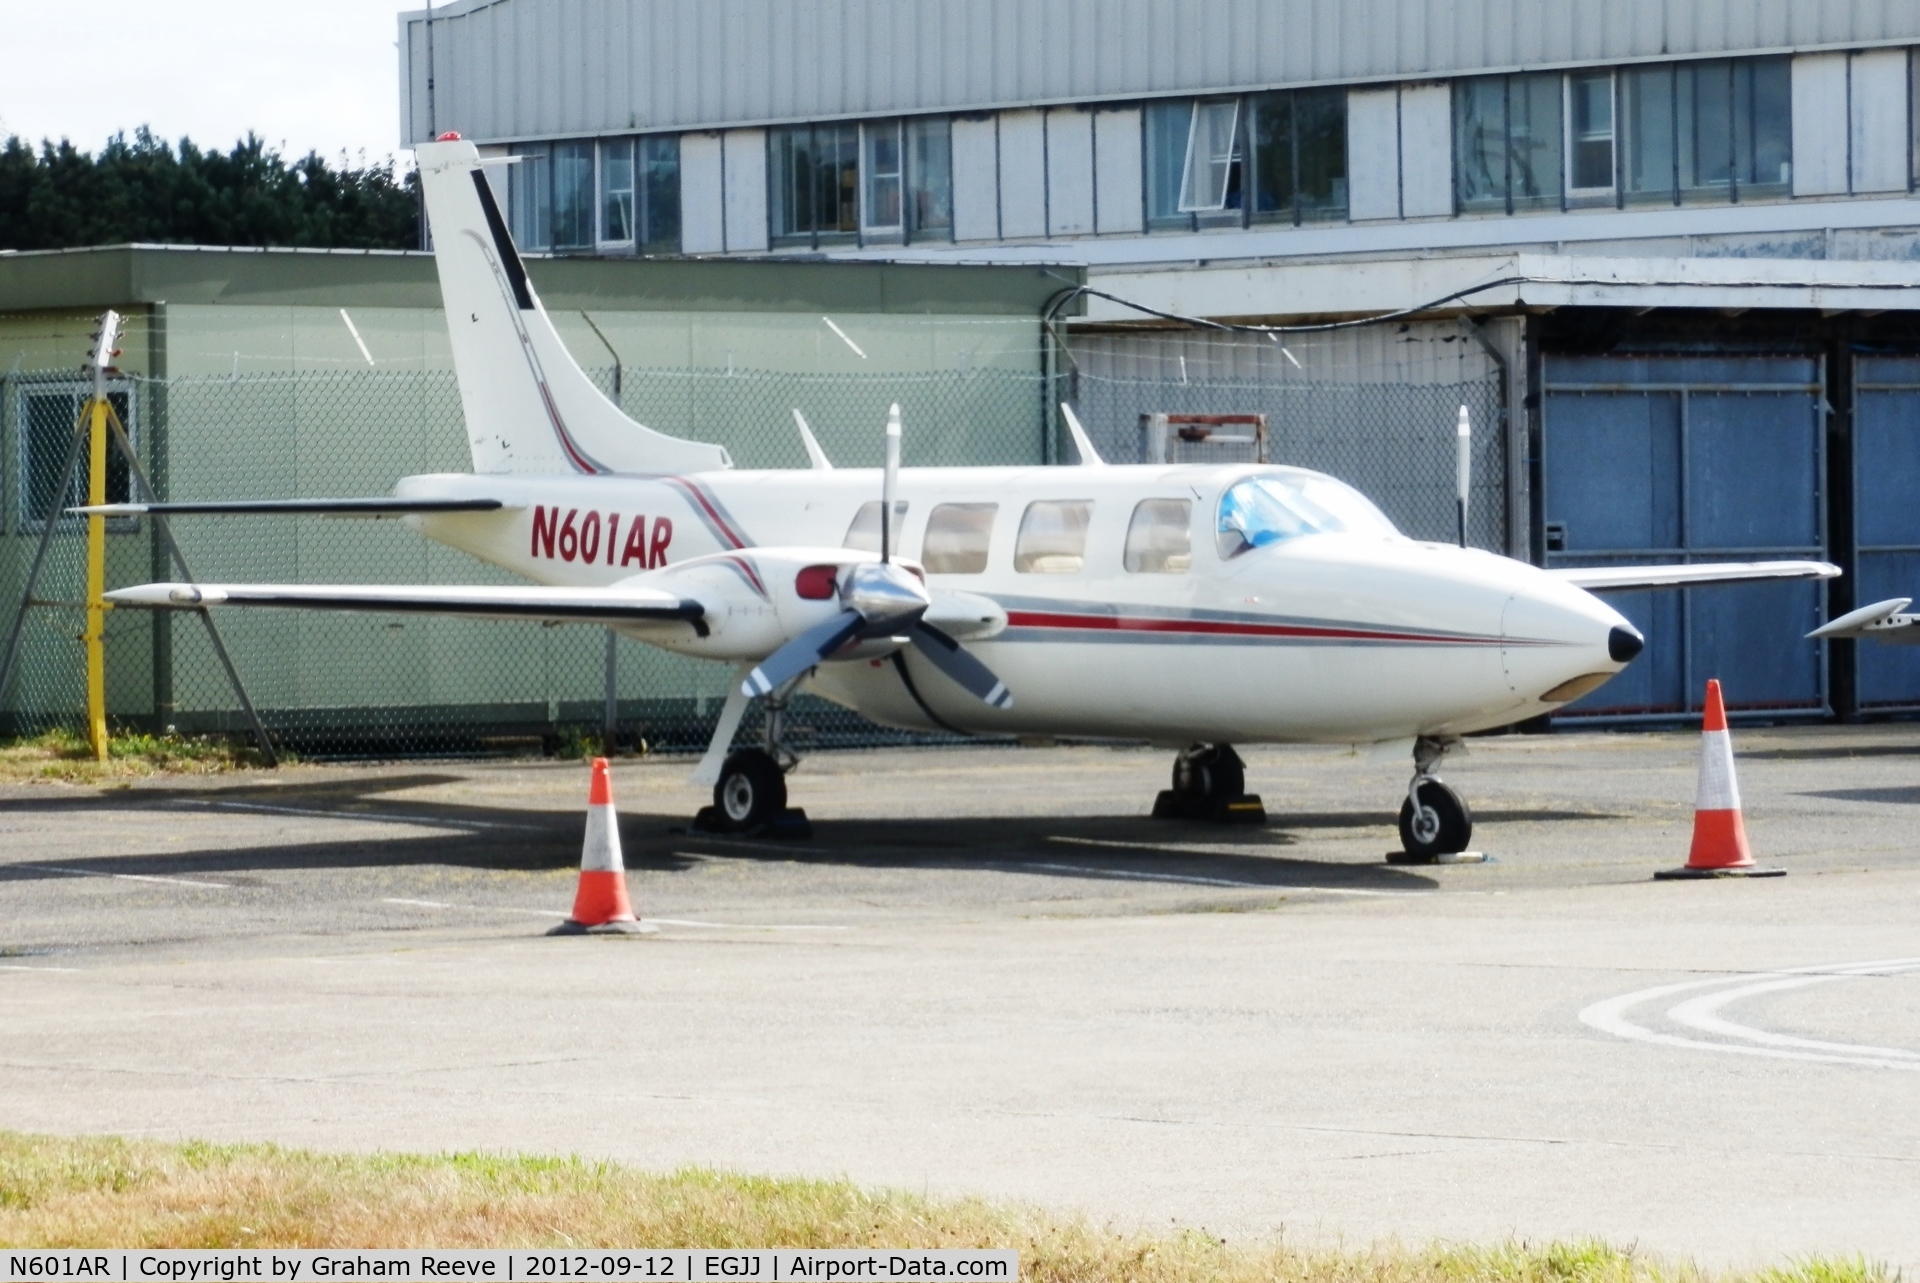 N601AR, 1979 Piper Aerostar 601P C/N 61P05697963247, Parked at Jersey.